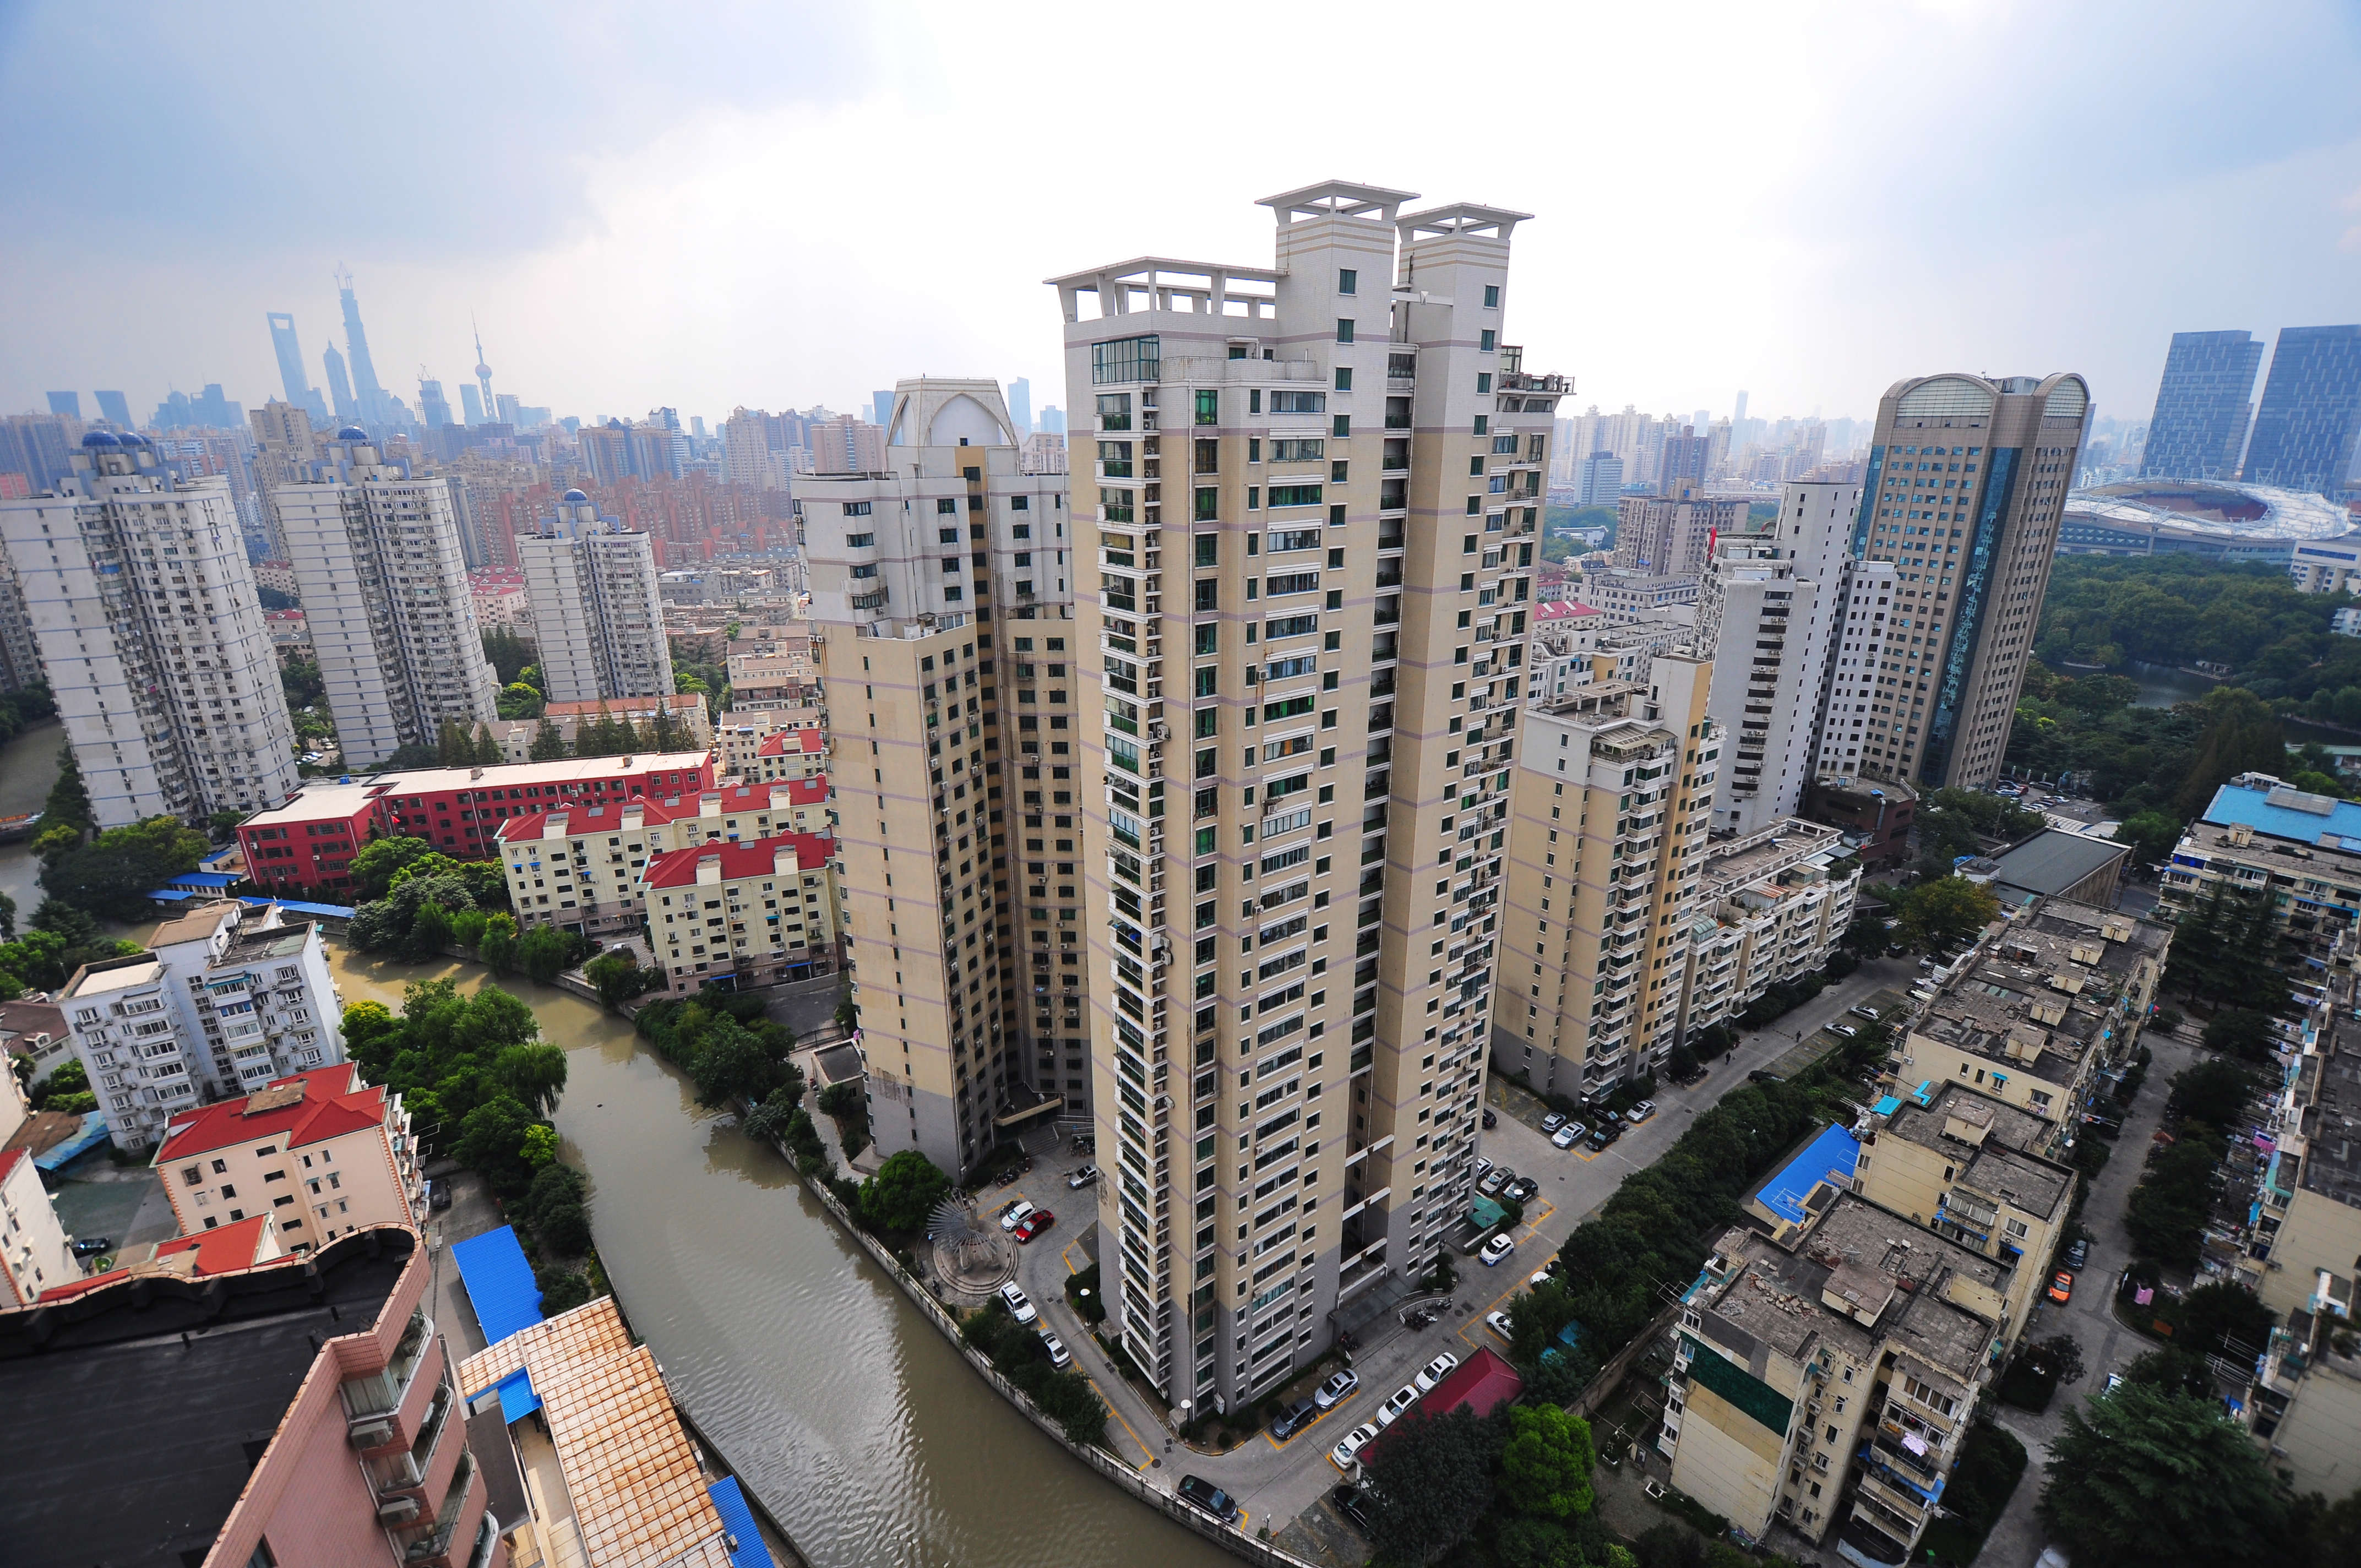 (131022) -- SHANGHAI, Oct. 22, 2013 (Xinhua) -- Residential buildings are seen in Hongkou District, east China's Shanghai, Oct. 22, 2013. Prices of both new and existing homes continued to rise in most Chinese cities in September, according to official data released on Tuesday. (Xinhua/Shen Chunchen) (cjq)